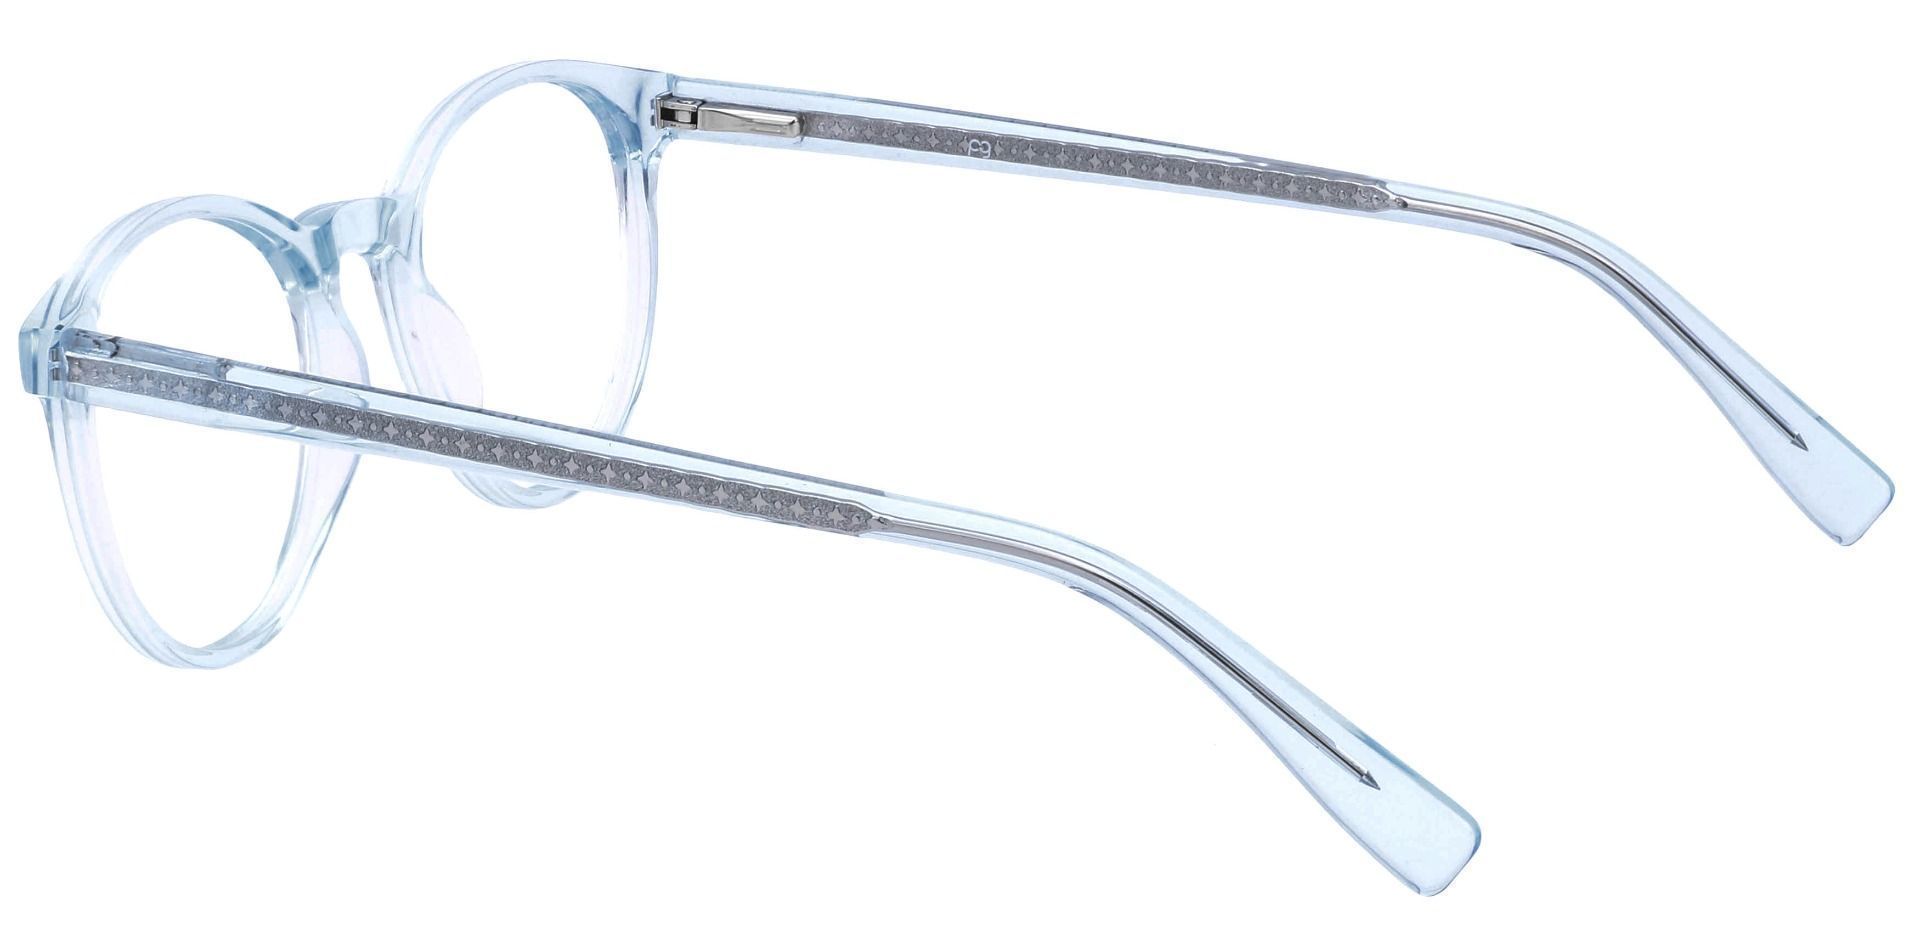 Stellar Oval Blue Light Blocking Glasses - The Frame Is Clear With Light Blue